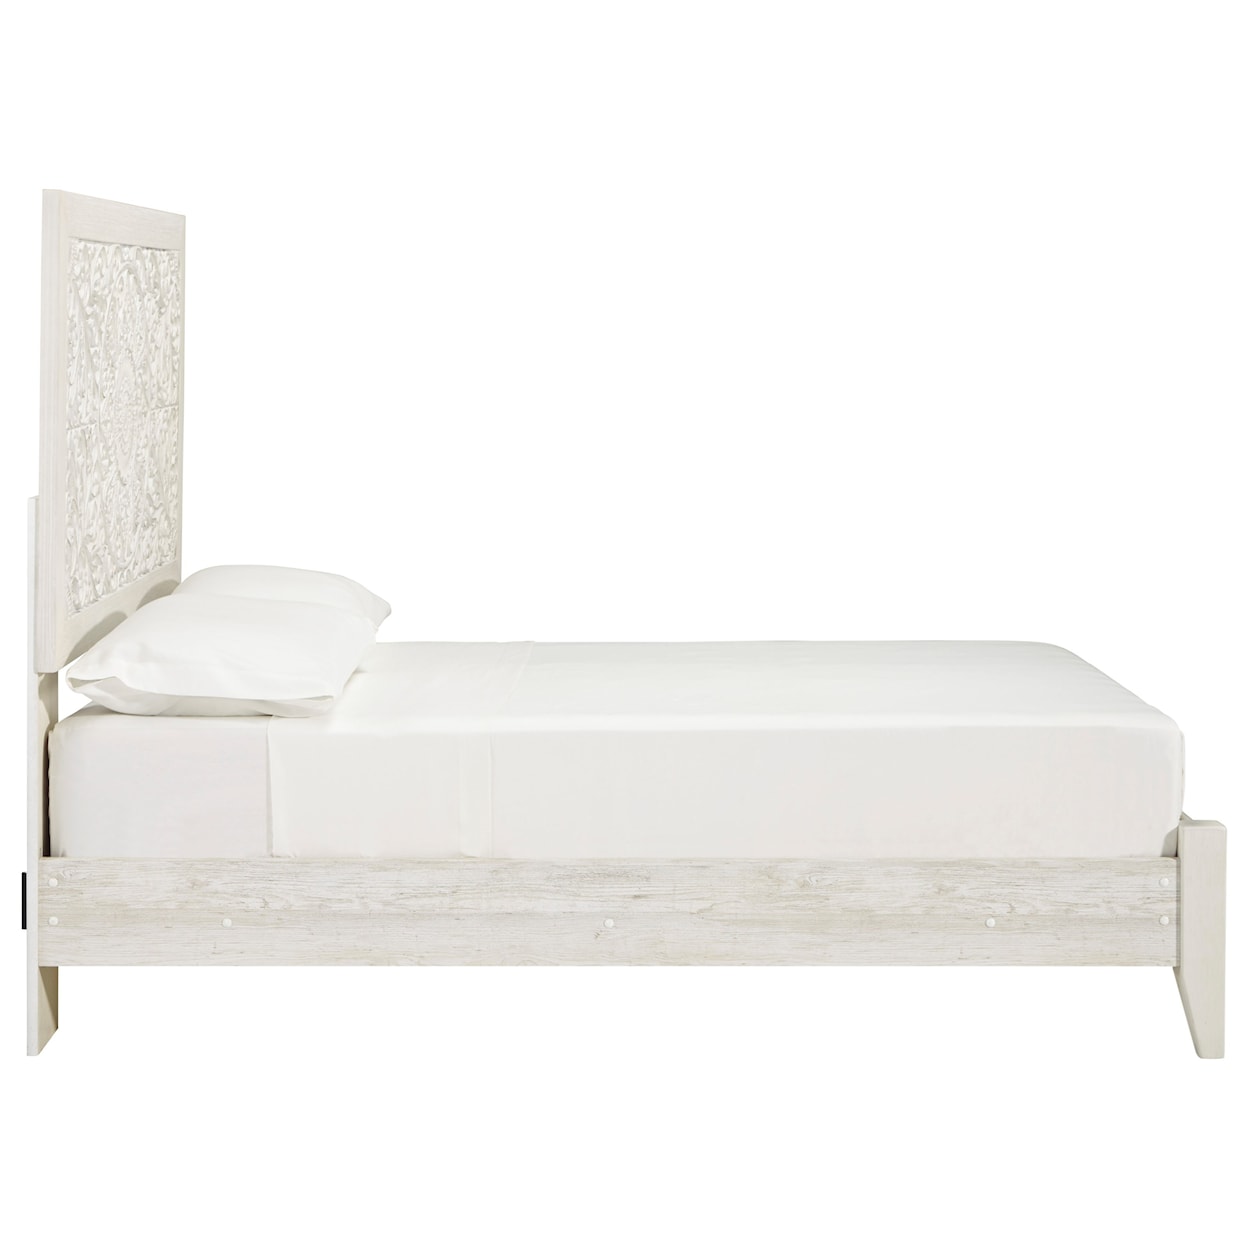 Signature Design by Ashley Paxberry Full Panel Bed